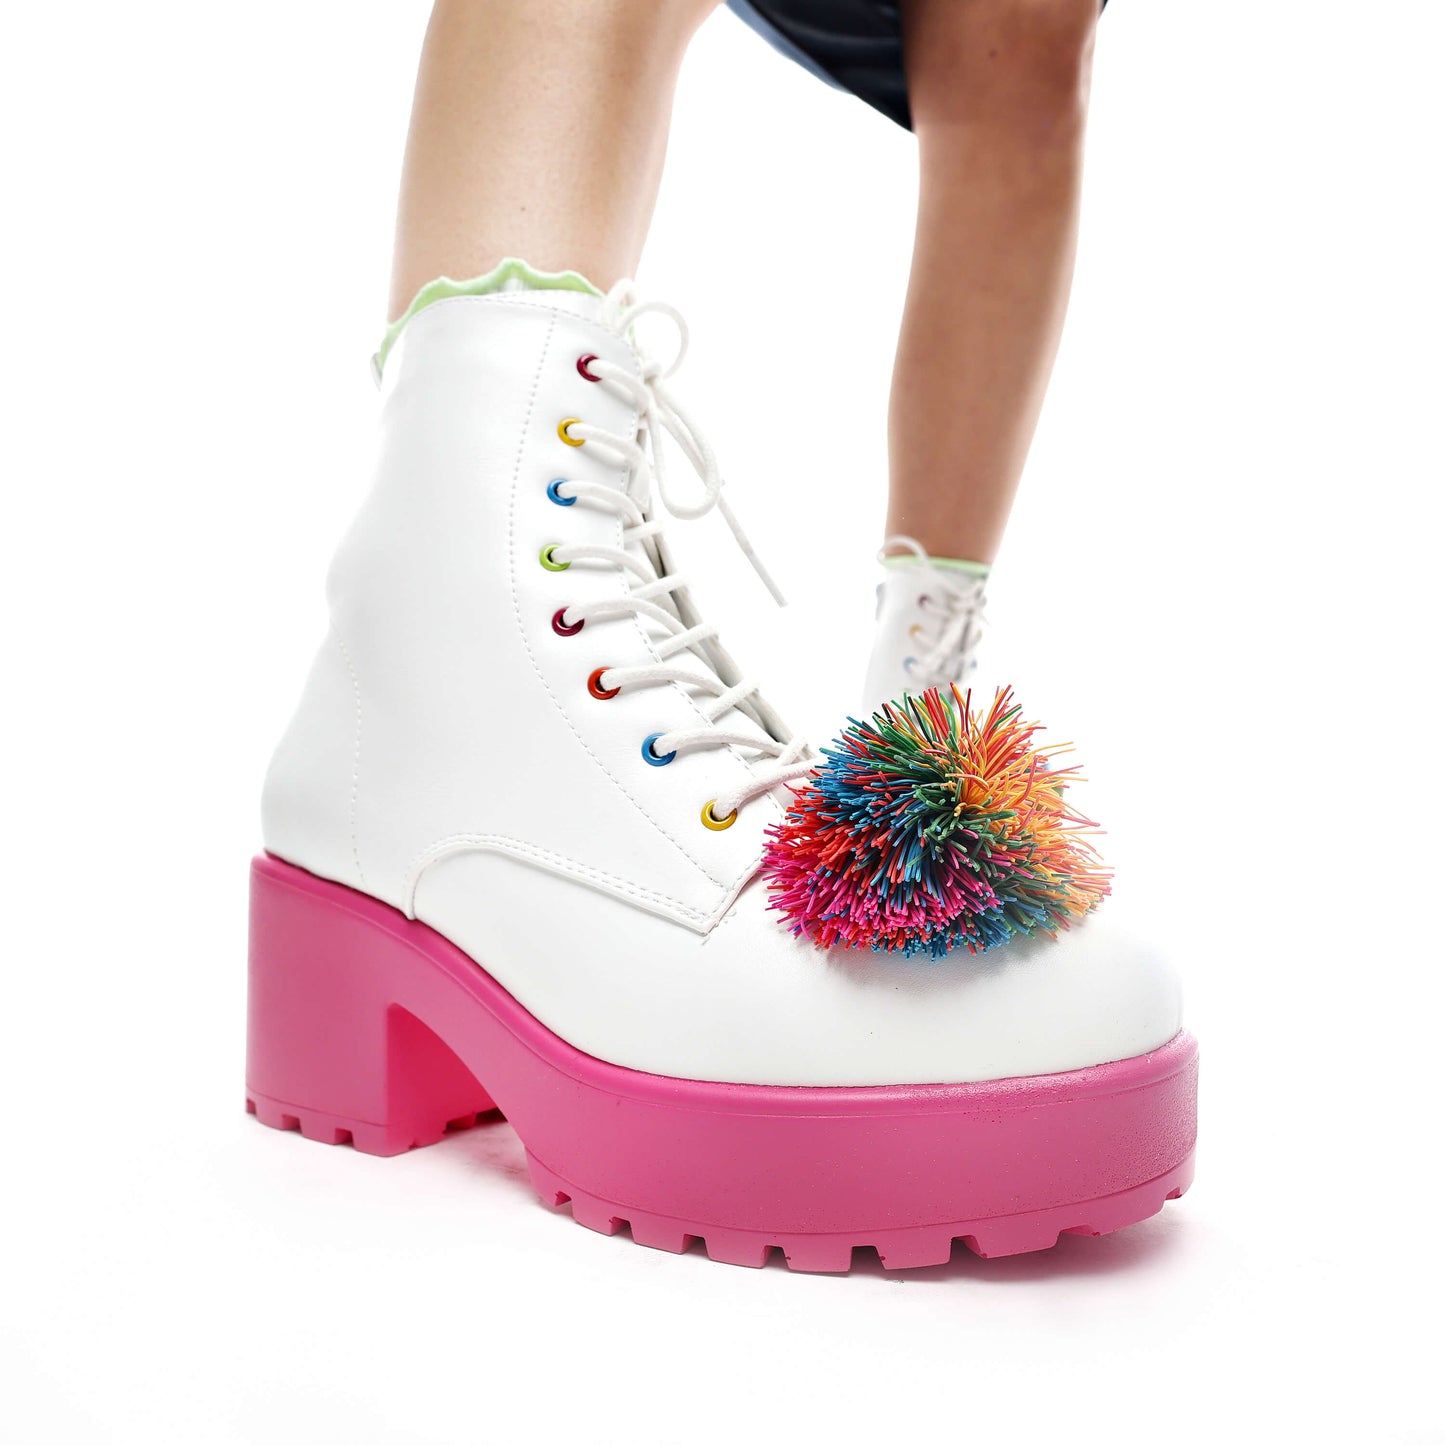 Ghost Pepper Party Multi Fun Ball Boots - Ankle Boots - KOI Footwear - White - Model Side View